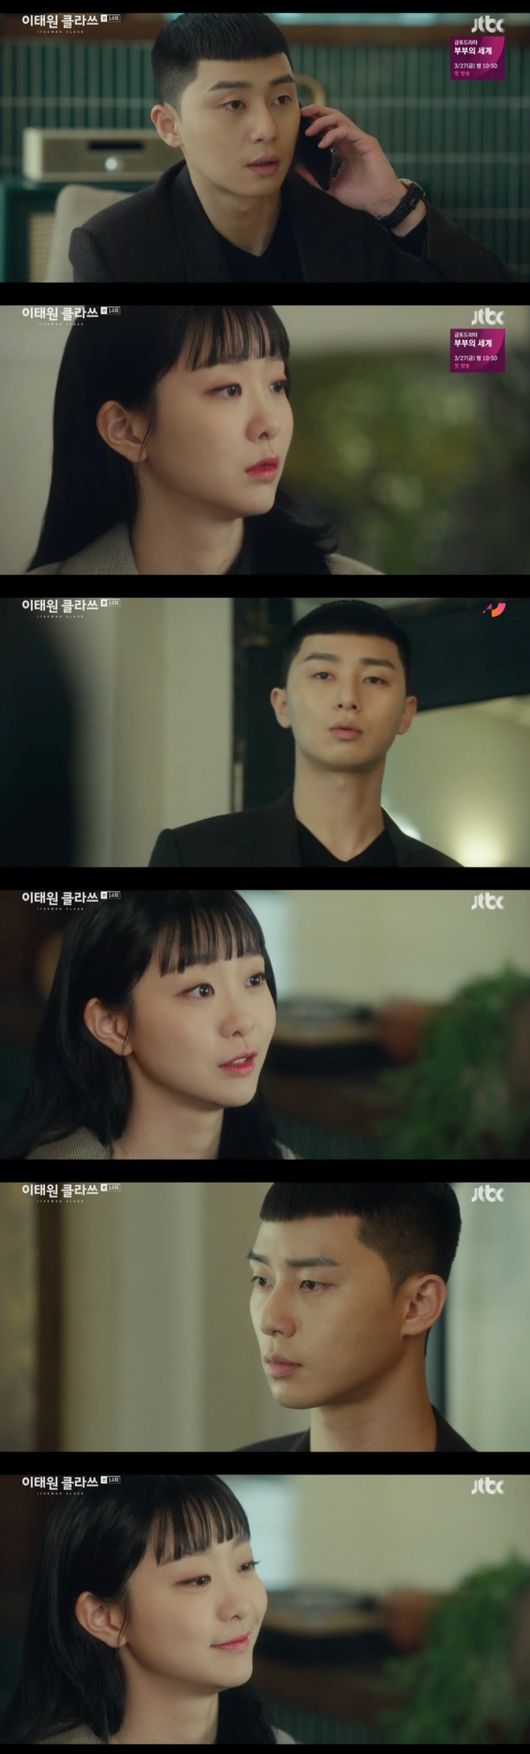 Itaewon Klath Park Seo-joon began to feel Kim Da-mi as DominatrixIn the JTBC gilt drama Itaewon Klath (playplayplay by Gwangjin, directed by Kim Sung-yoon), which was broadcast on the 14th, subtle air currents were drawn between Park Sae-ro-yi (Park Seo-joon) and Joe-yool Lee (Kim Da-mi).Park Sae-ro-yi was working with Joe-yool Lee when he got a call from Oh Soo-ah.Park Sae-ro-yi turned down Oh Soo-ahs meetingJoe-yool Lee grumbled: Someones out of love and is out all night, and some are whining with Dominatrix.Park Sae-ro-yi said, Dont do that to me. Dont do that to me. I told you I definitely dont see you as Dominatrix.Park Sae-ro-yi was about to leave, but he said, Why should I feel sorry? Why do you feel this?Joe-yool Lee laughed and said, I do not know why, I feel a little like Dominatrix. I know the delegate best.I am now looking like Dominatrix. Park Sae-ro-yi left the office with a embarrassed look.Itaewon Klath captures broadcast screen